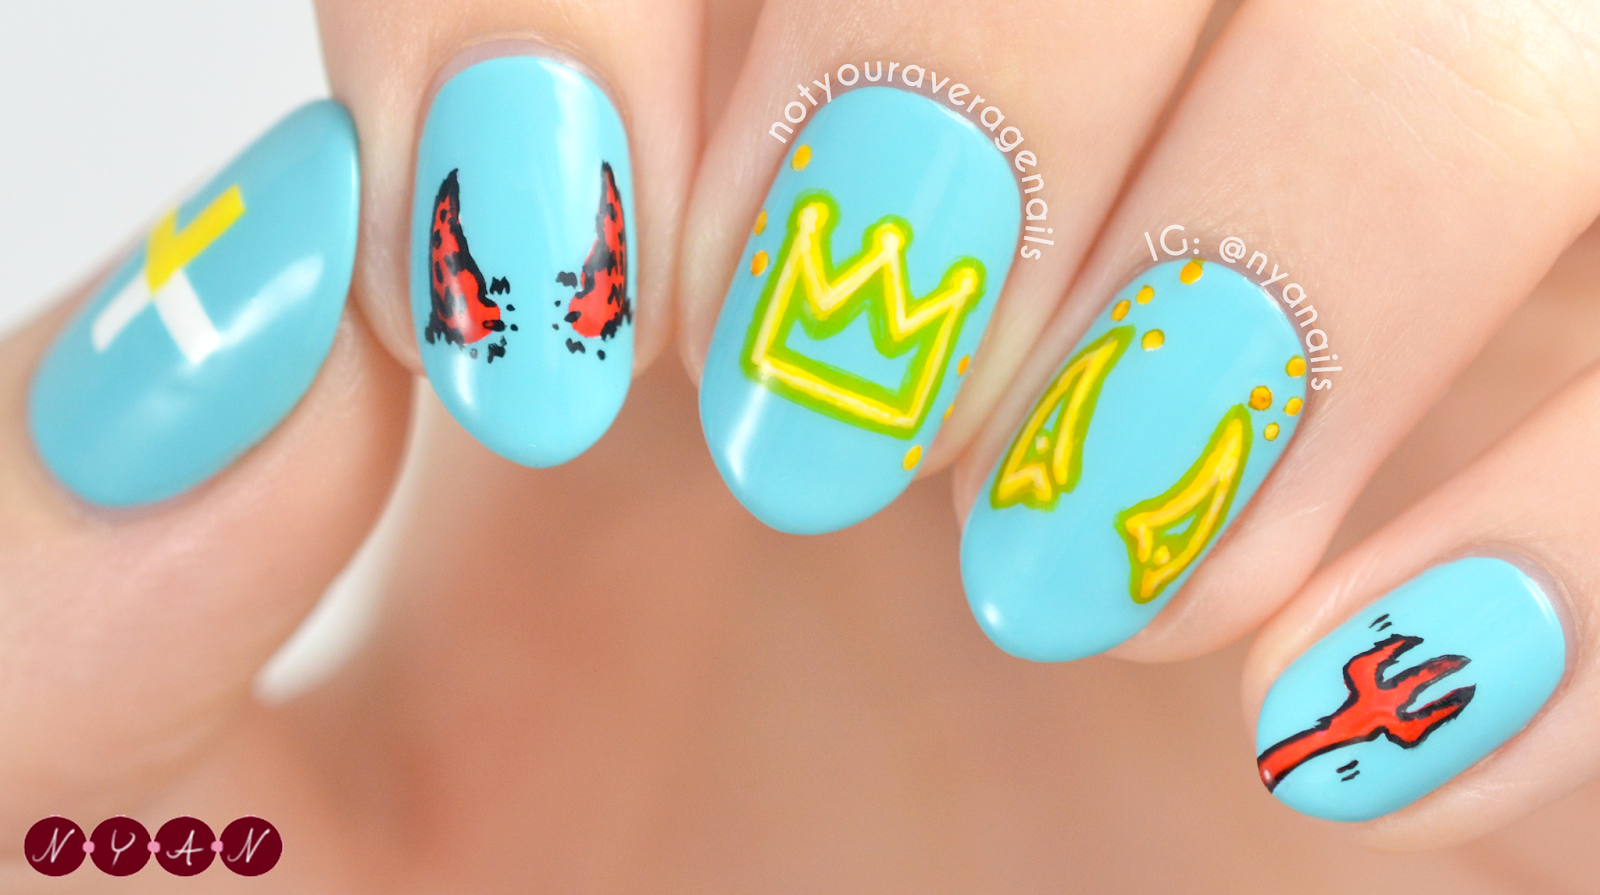 2. How to Create a Crown Design on Your Toe Nails - wide 7